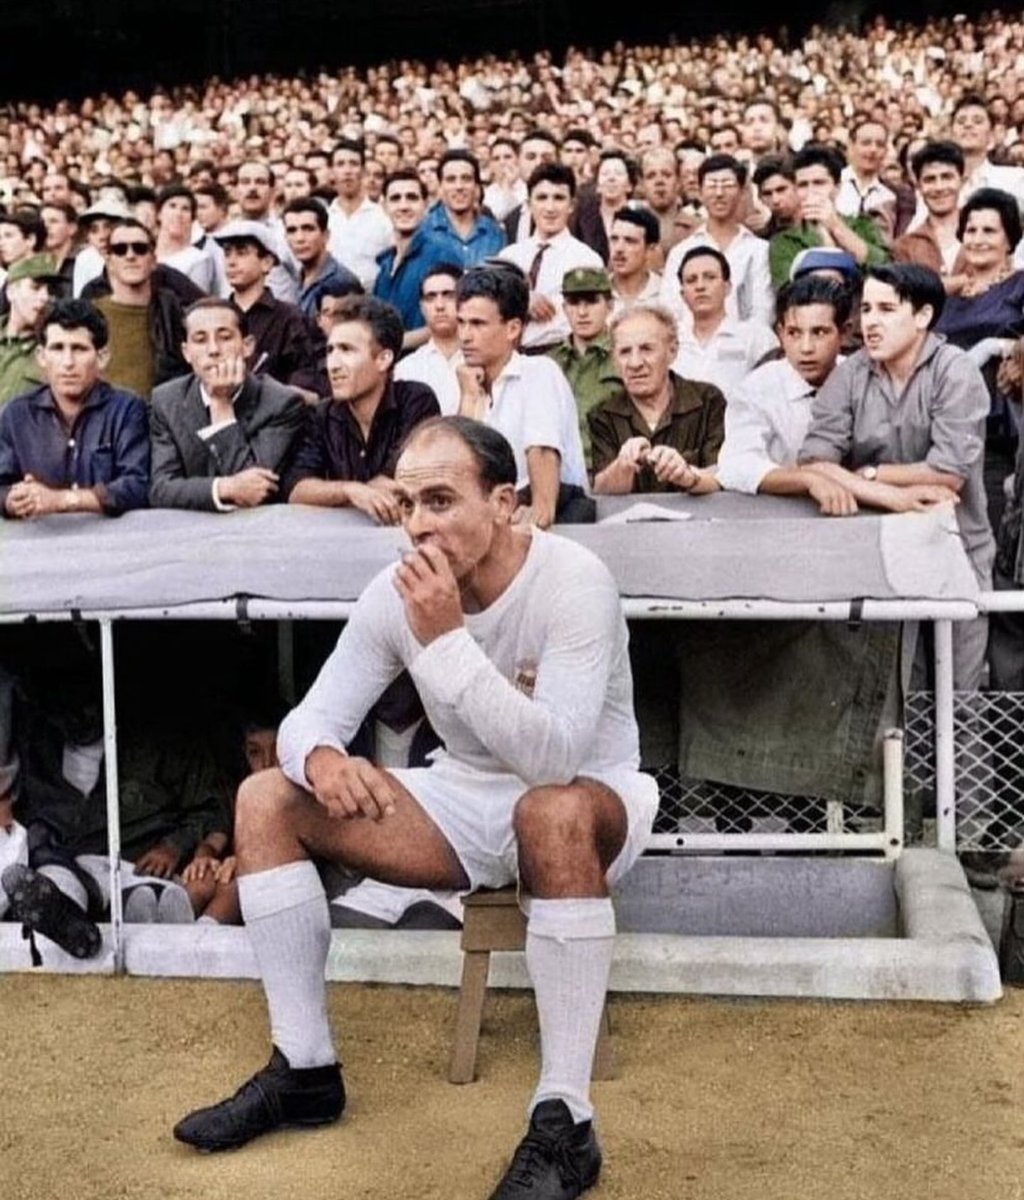 For all the #ClydeFC fans who are going to be chewing their nails later today...
Here's Alfredo Di Stefano having a cheeky smoke on the Real Madrid bench, 1964
#bullywee @ClydeFC